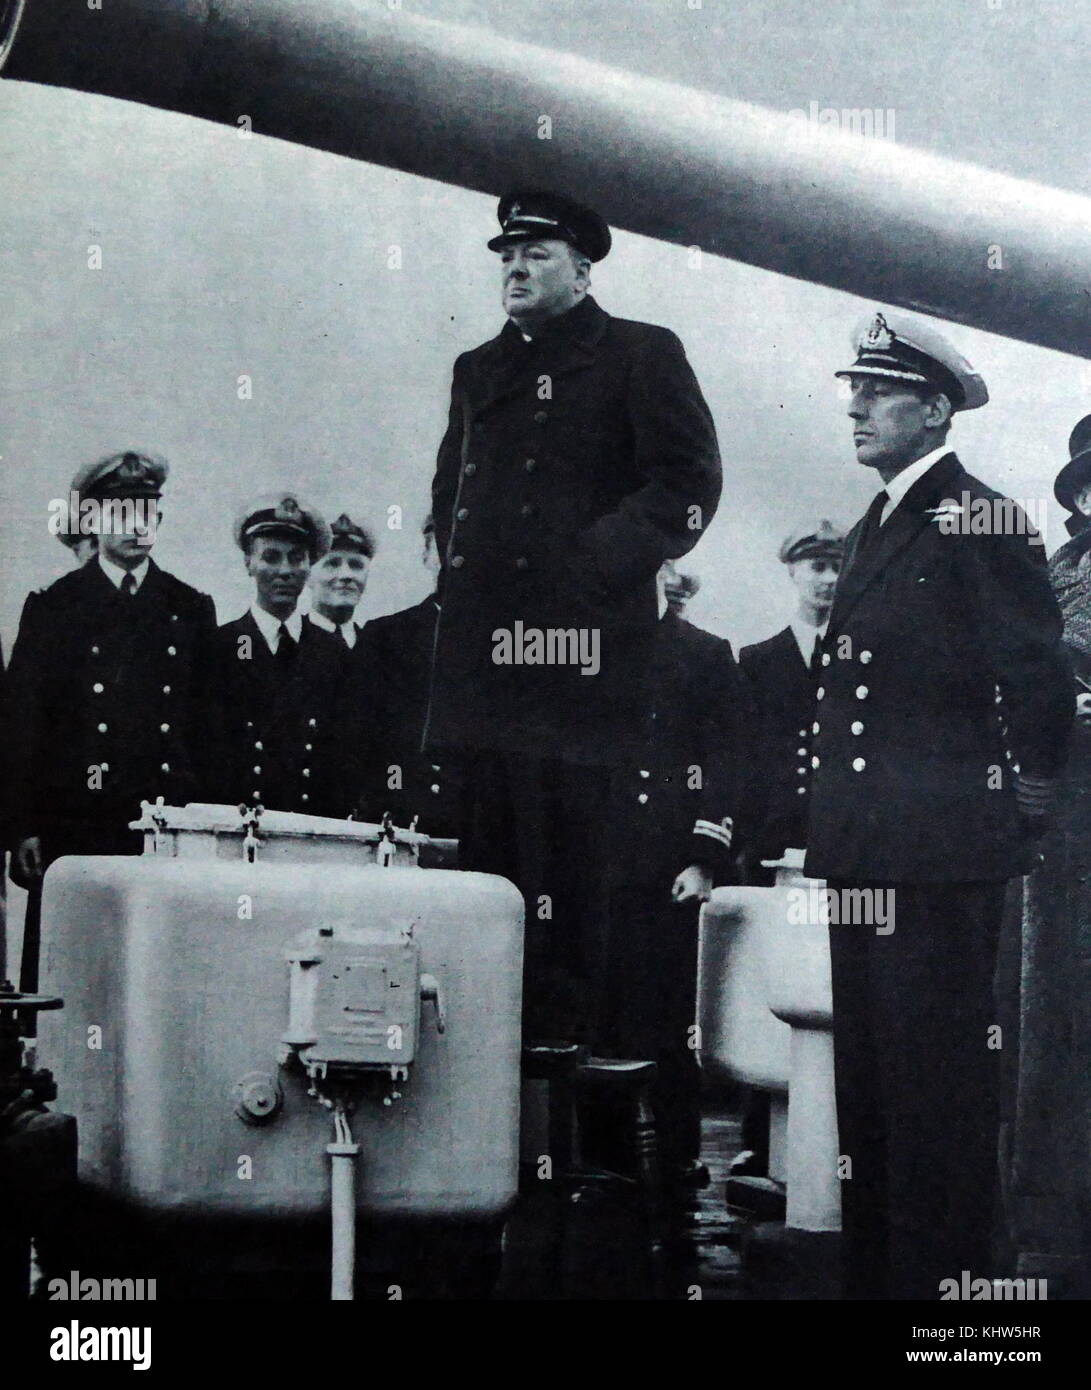 Photograph of Sir Winston Churchill addressing the crew of H.M.S. Exeter on their return from the sinking of the German cruiser Admiral Graf Spee at the Battle of the River Plate. Sir Winston Leonard Spencer-Churchill (1874-1965) a British politician and Prime Minister of the United Kingdom. Dated 20th Century Stock Photo